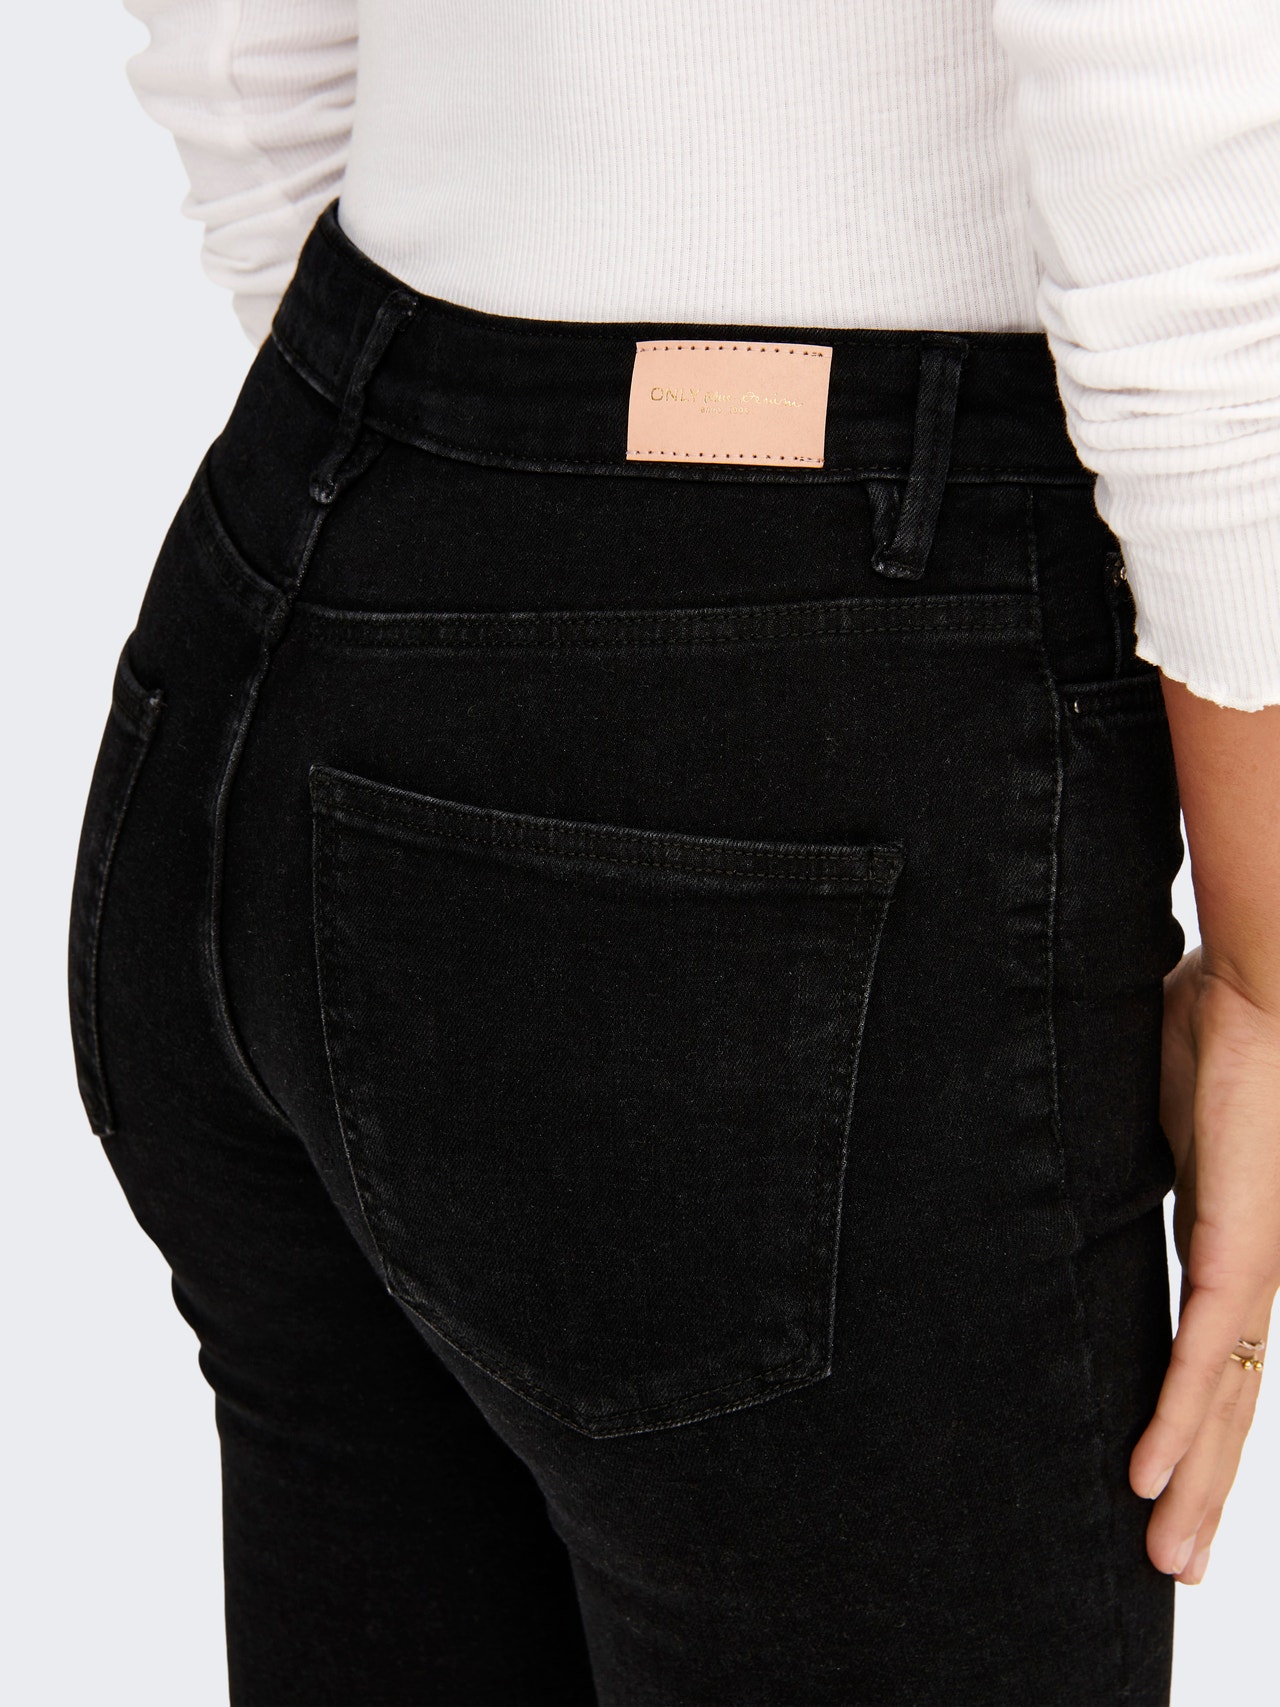 ONLY ONLICONIC SK LANG ANK NOOS high waist jeans -Black Denim - 15247810